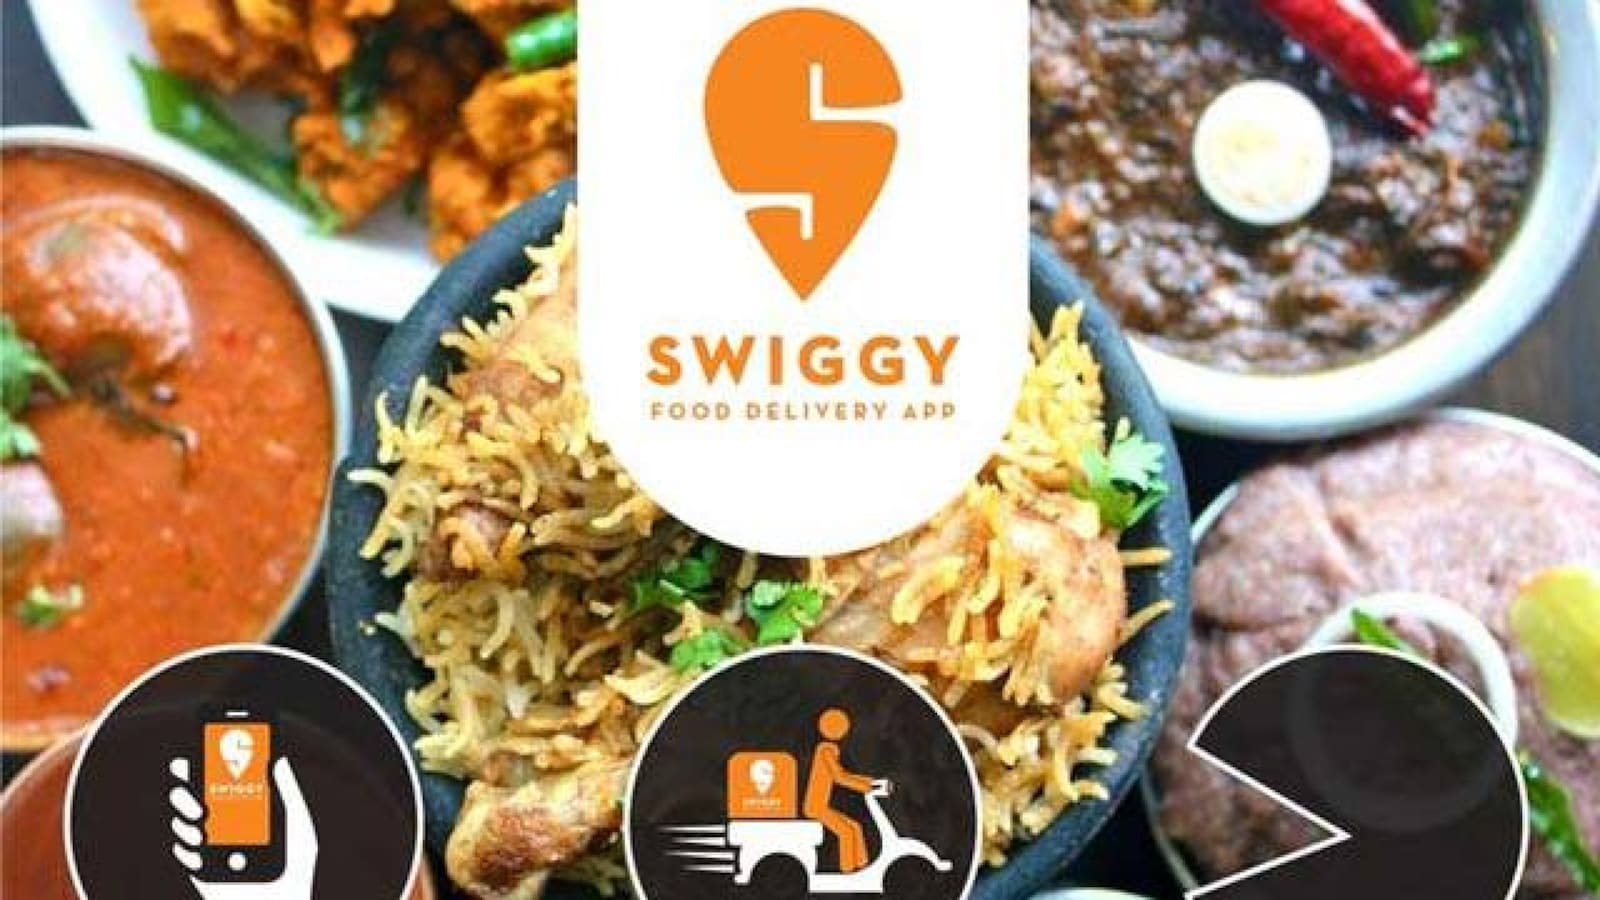 Swiggy moves beyond food delivery, launches Stores to deliver everyday needs